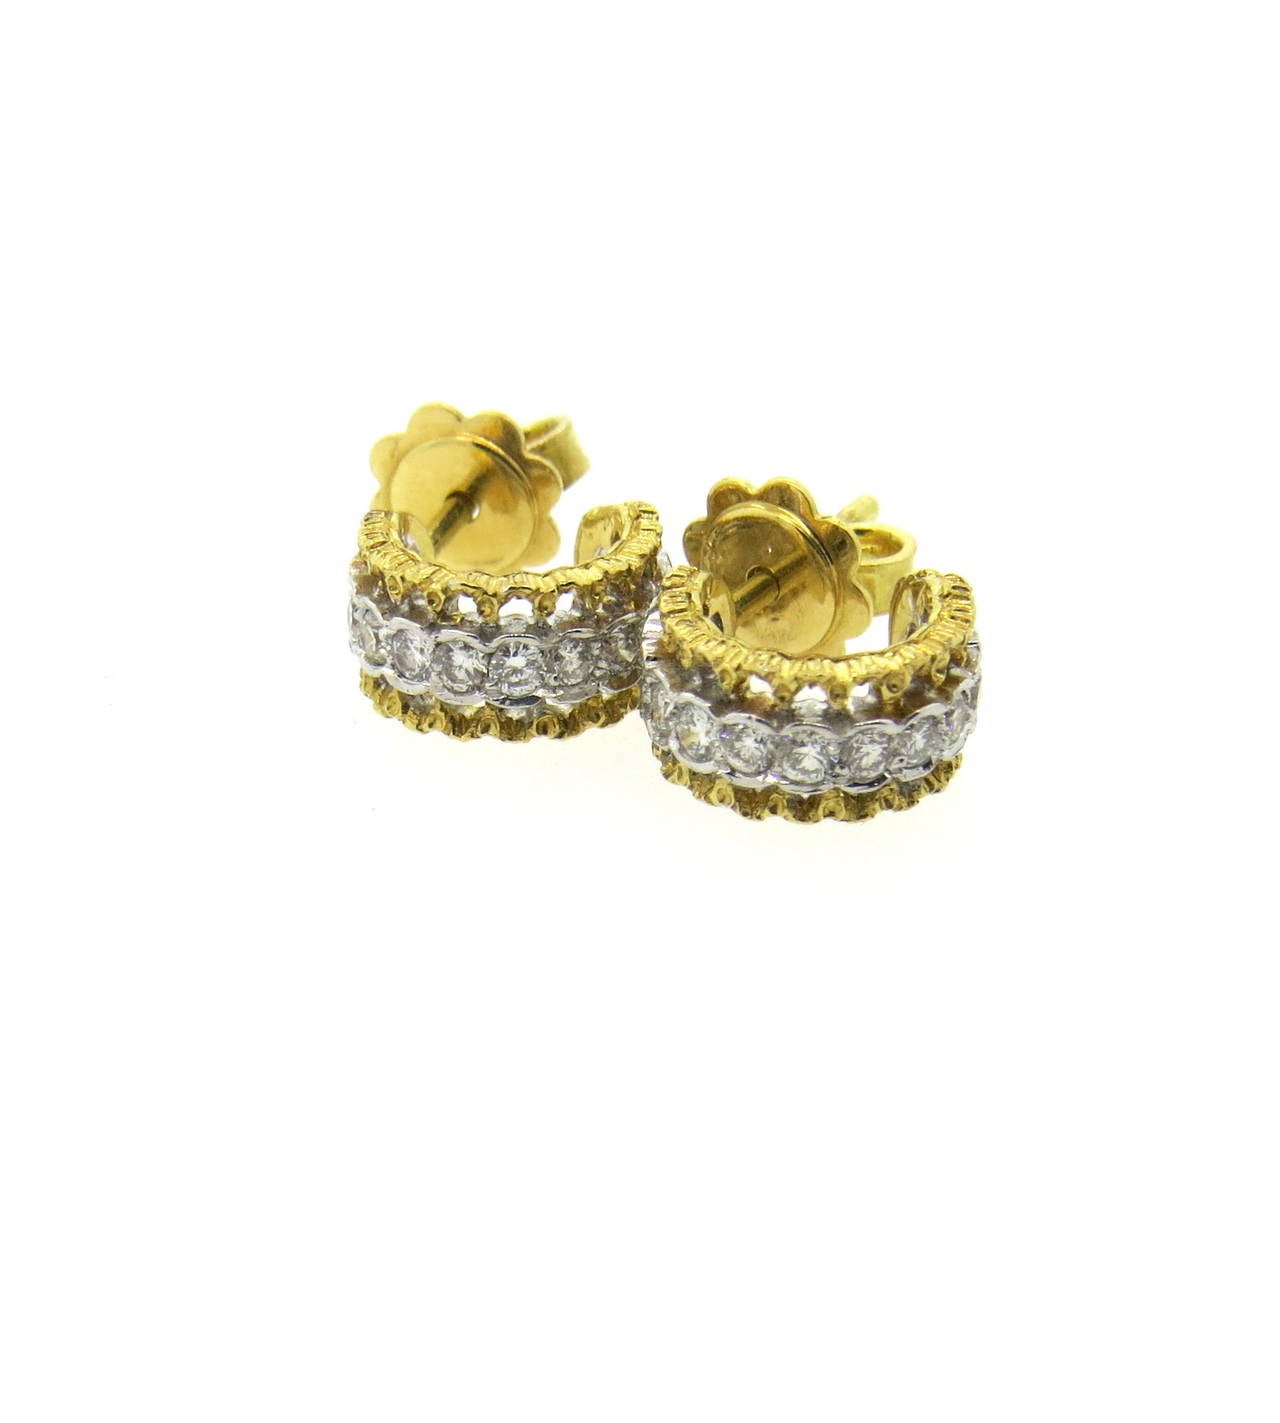 A pair of 18k yellow gold small hoop earrings set with 0.50ctw of G/VS diamonds.  Crafted by Mario Buccellati, the earrings measure 10mm x 5mm and weigh 3.9 grams. Comes with Buccellati box.